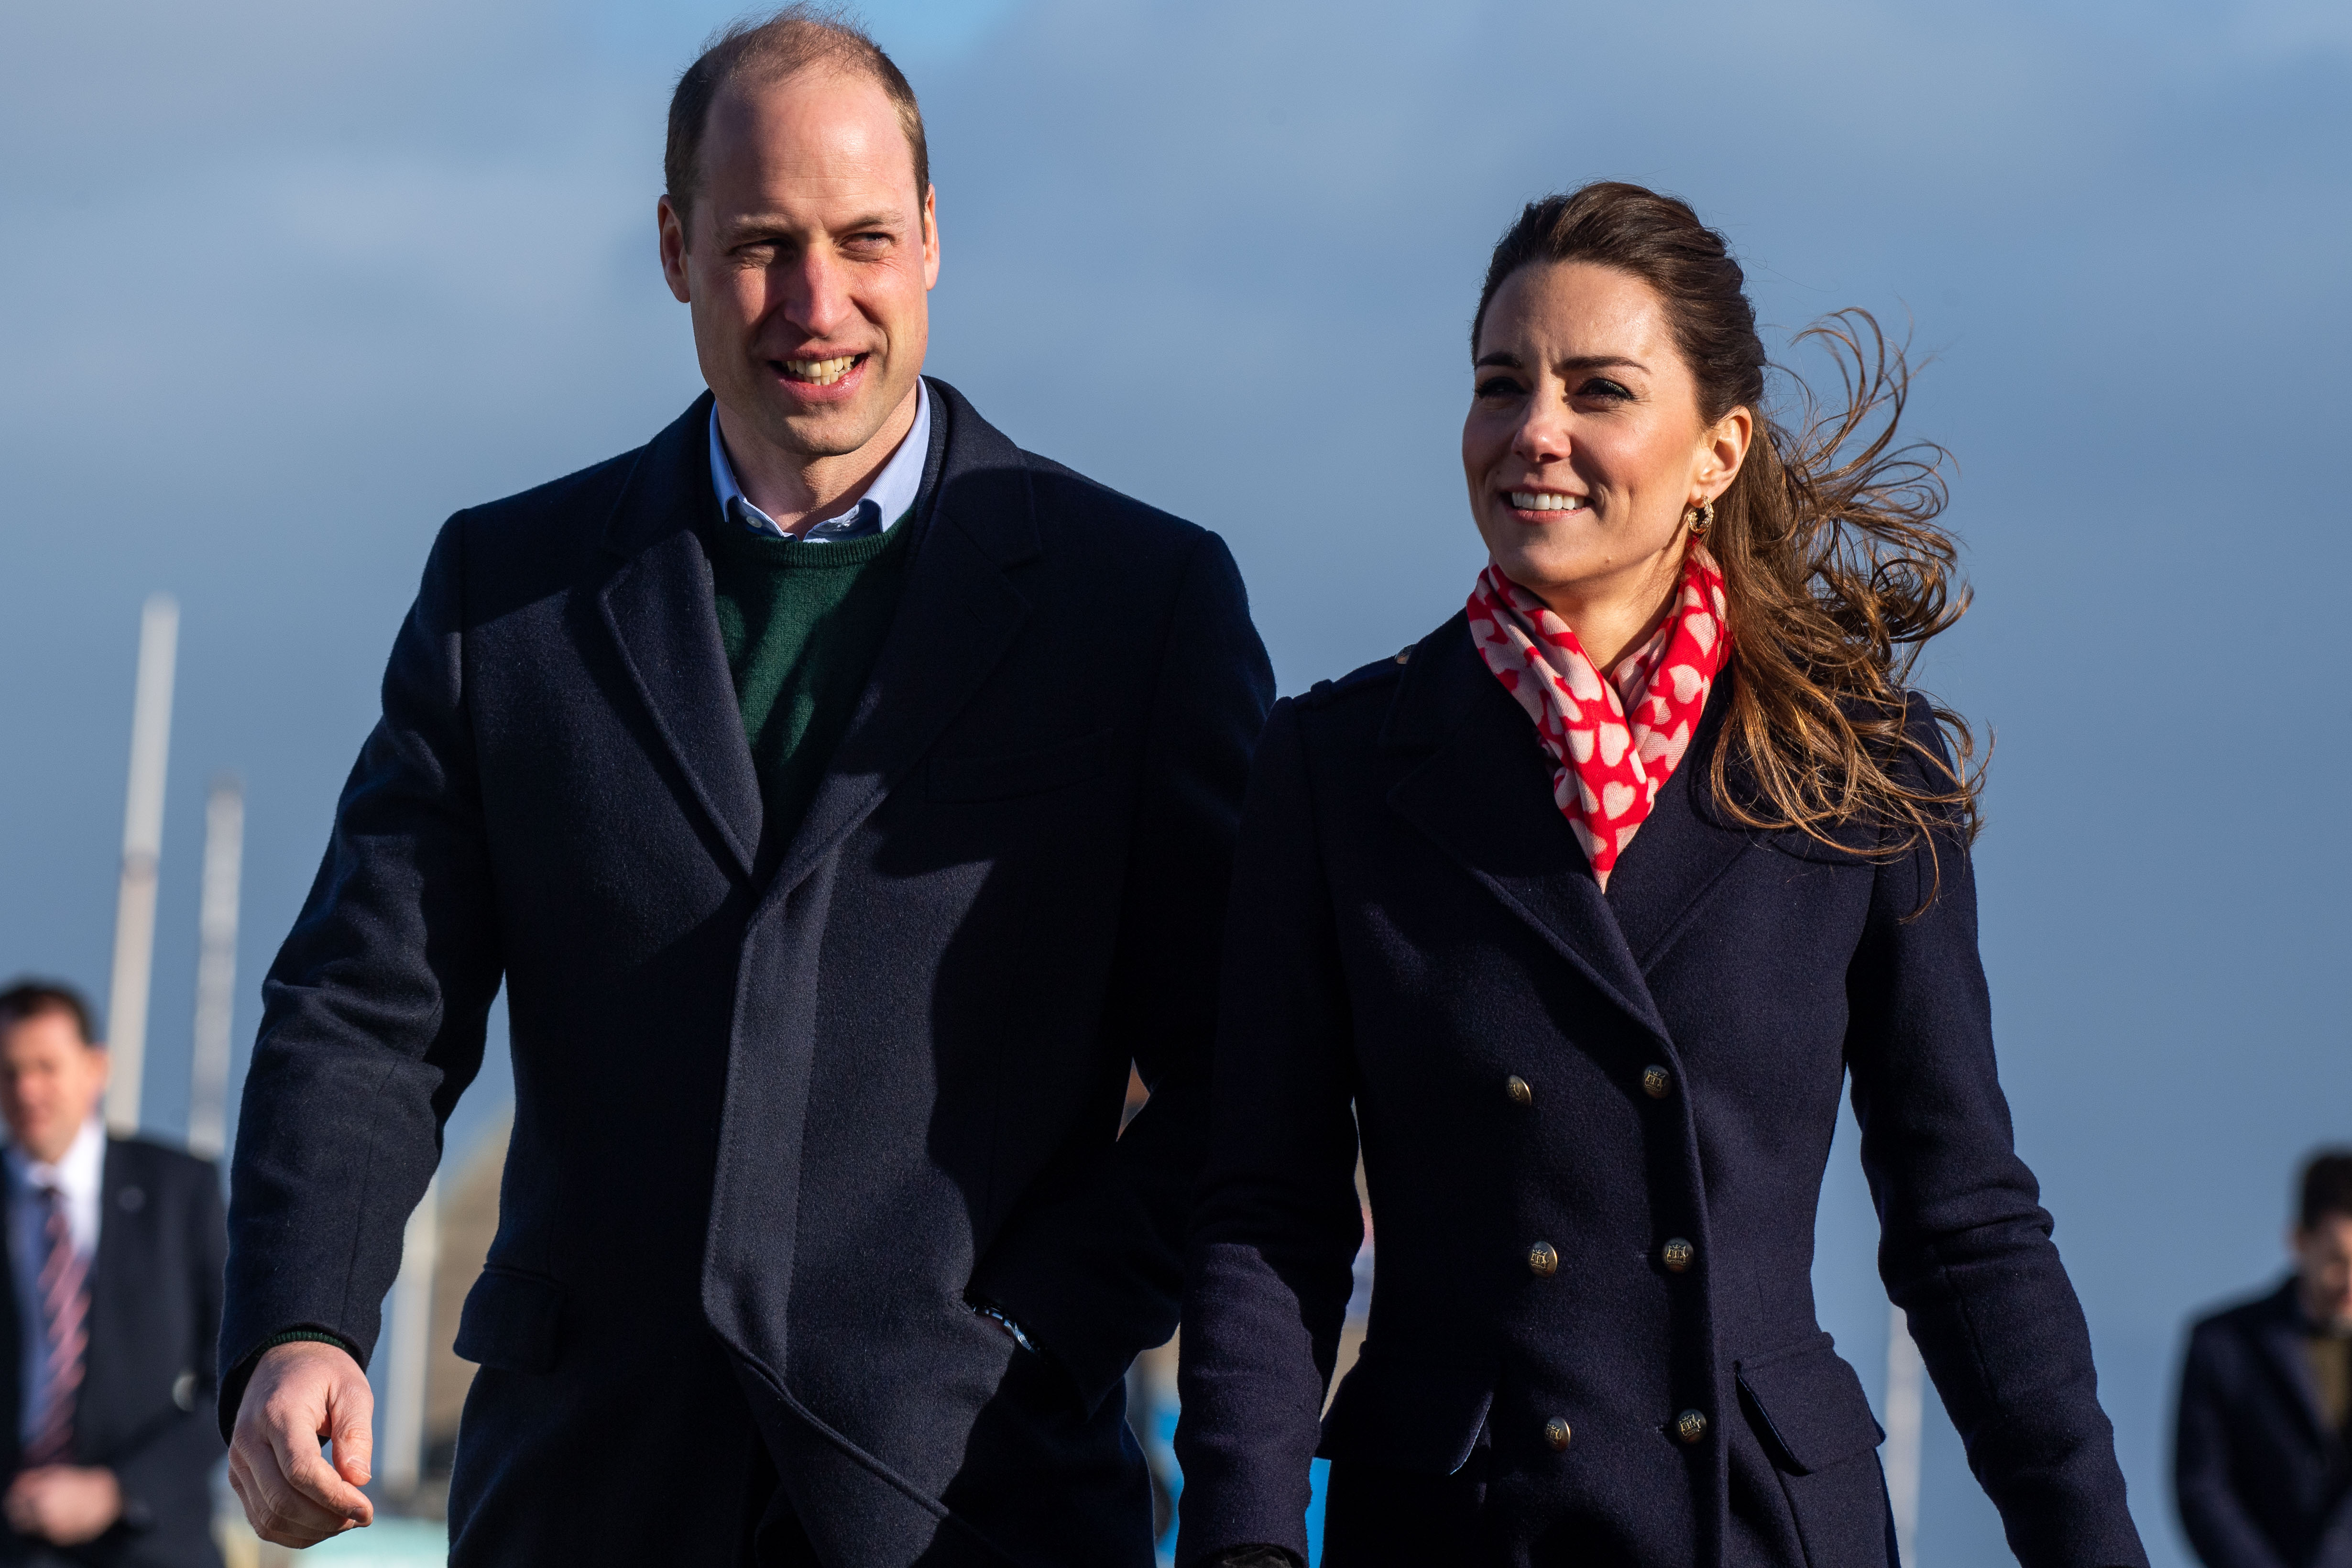 Kate Middleton and Prince William ‘Have a Very Grown-Up Rapport’ With Queen Camilla, Says Insider